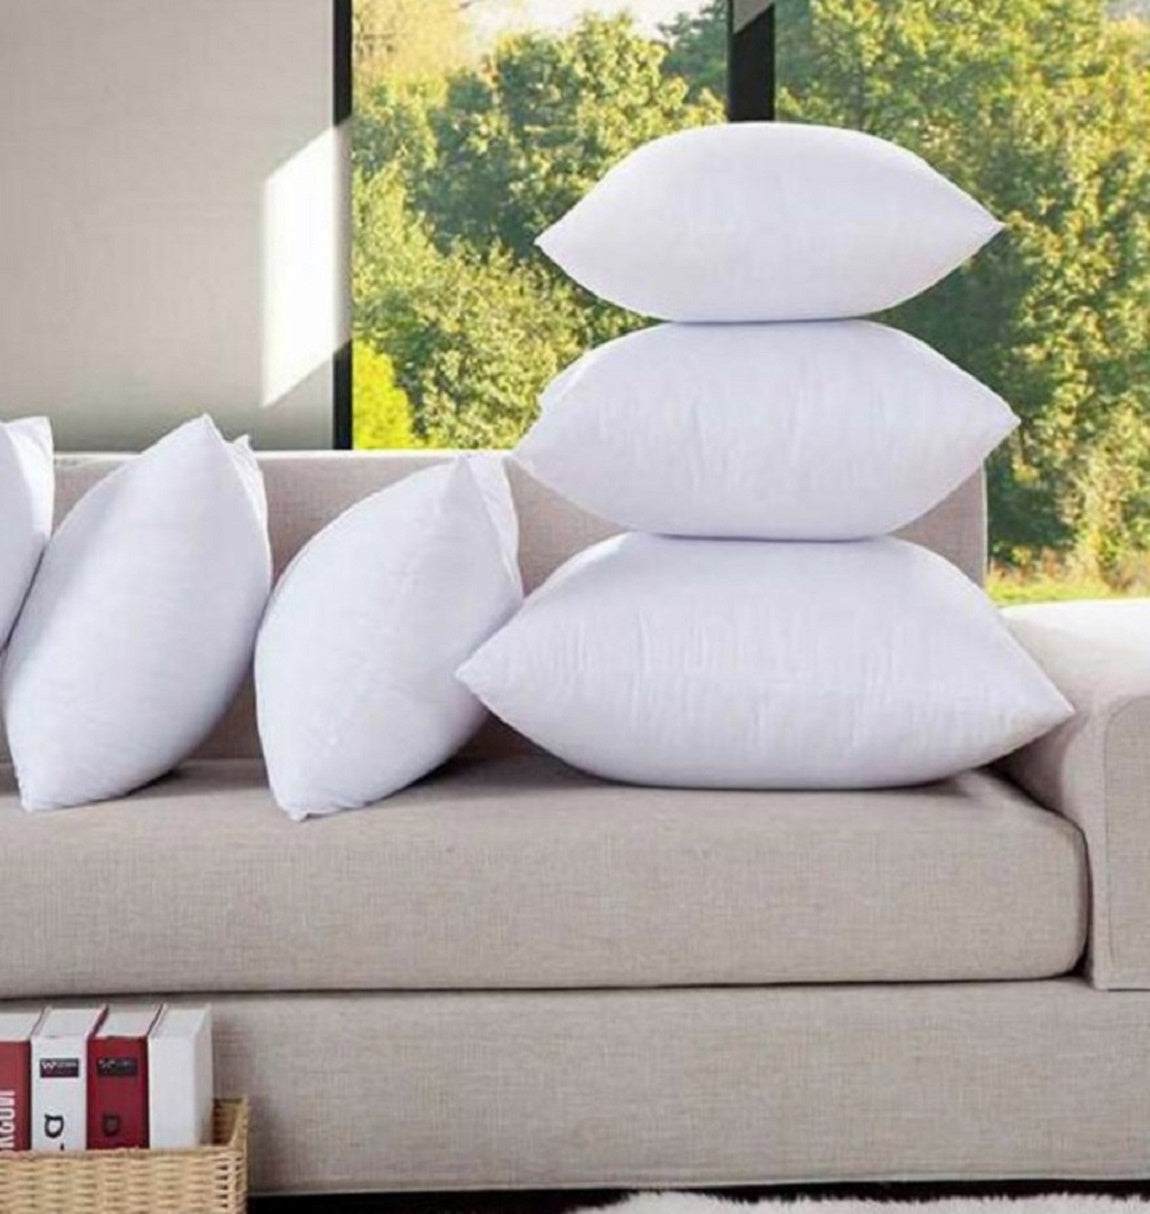 JDX White Polyester Cushion Fillers, Hotel/Home Quality Hollow Fiber Cushion Filler, Set of 5 Piece - JDX STORE